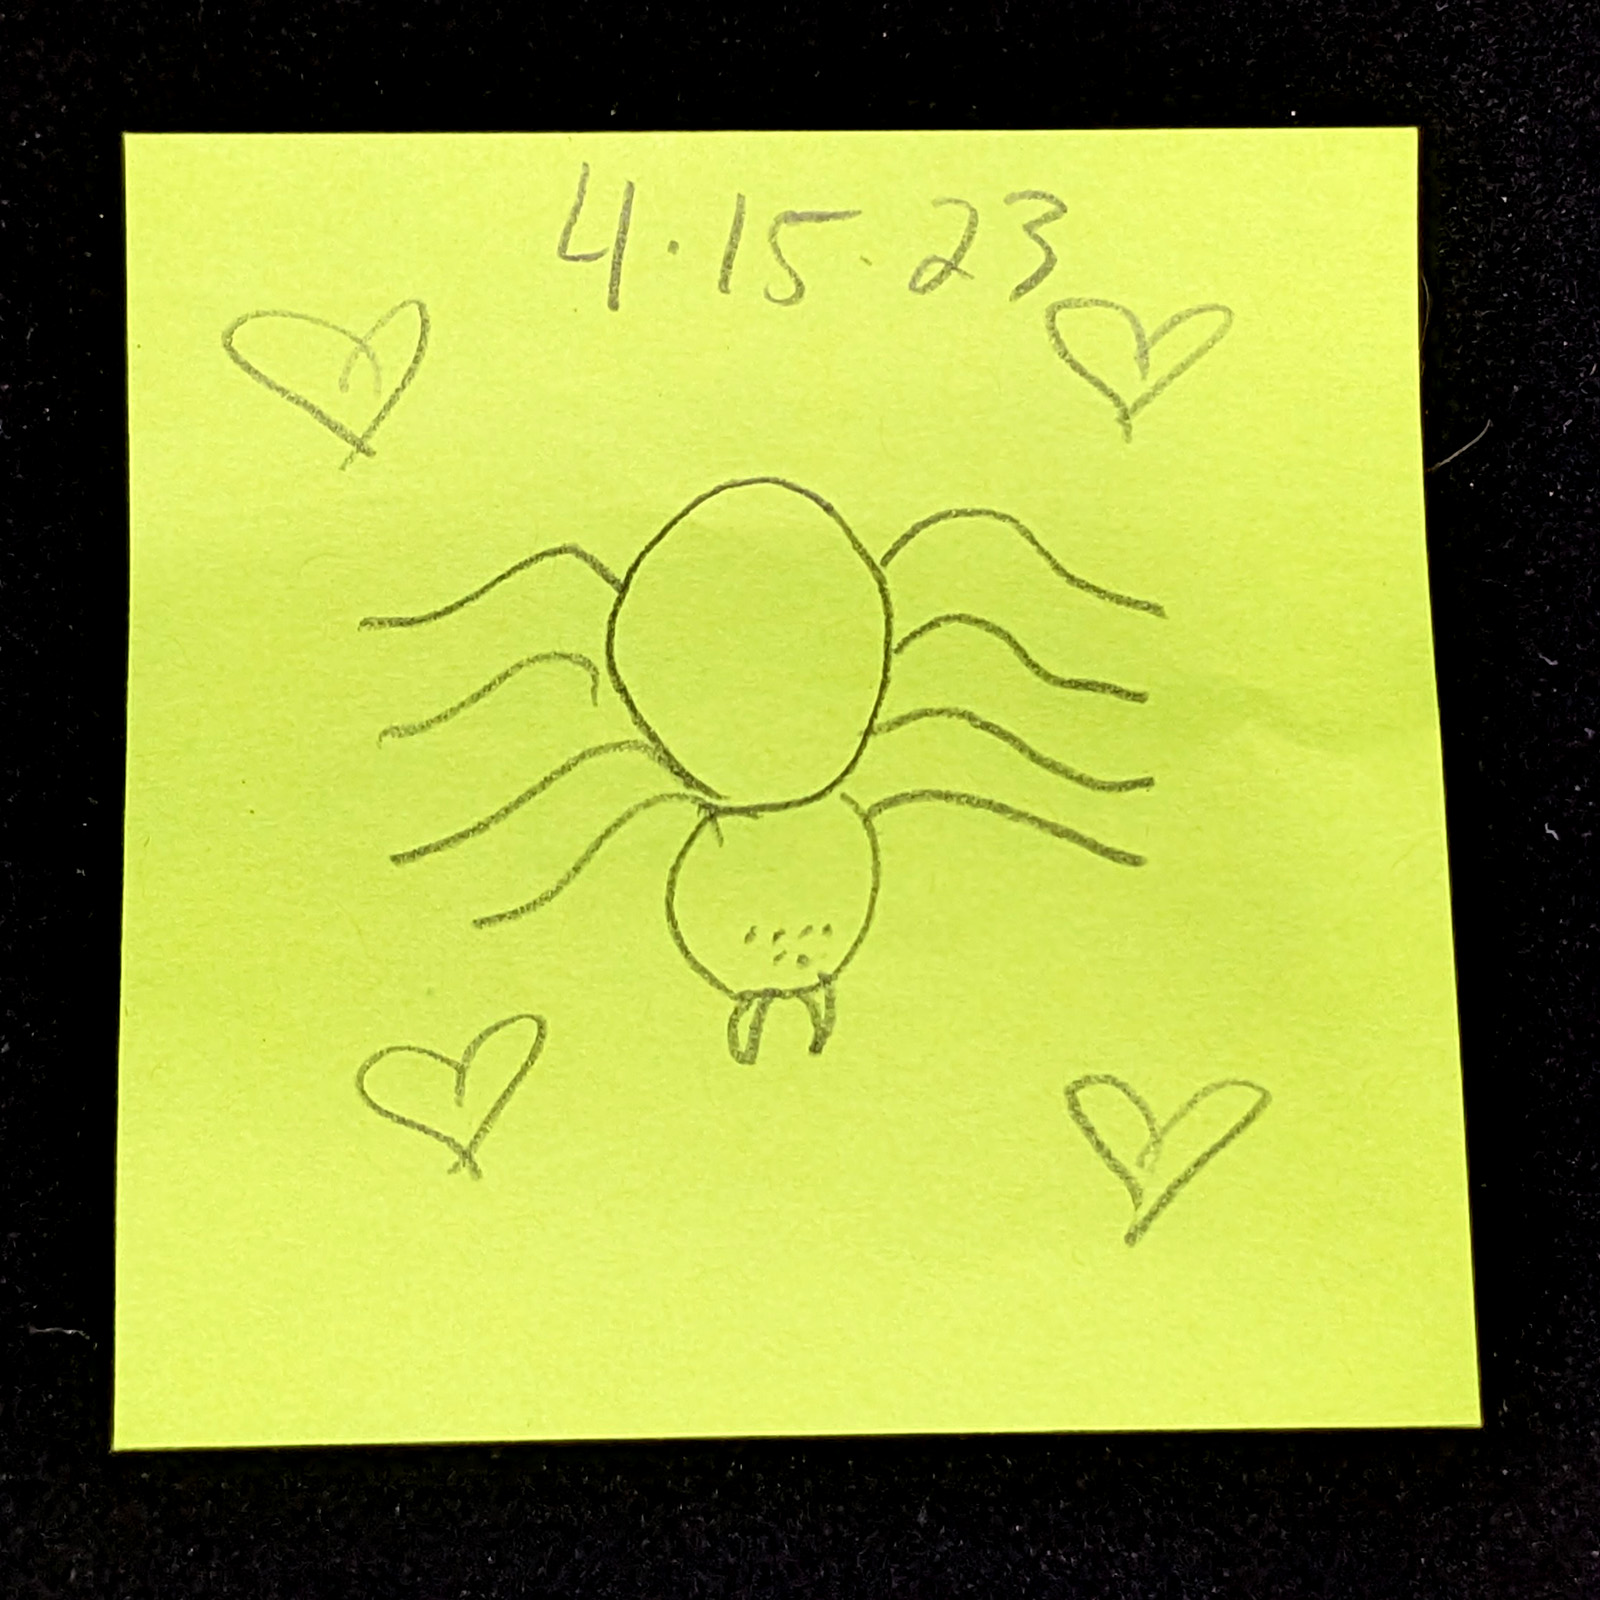 yellow post-it note with handwritten sketch of a spider